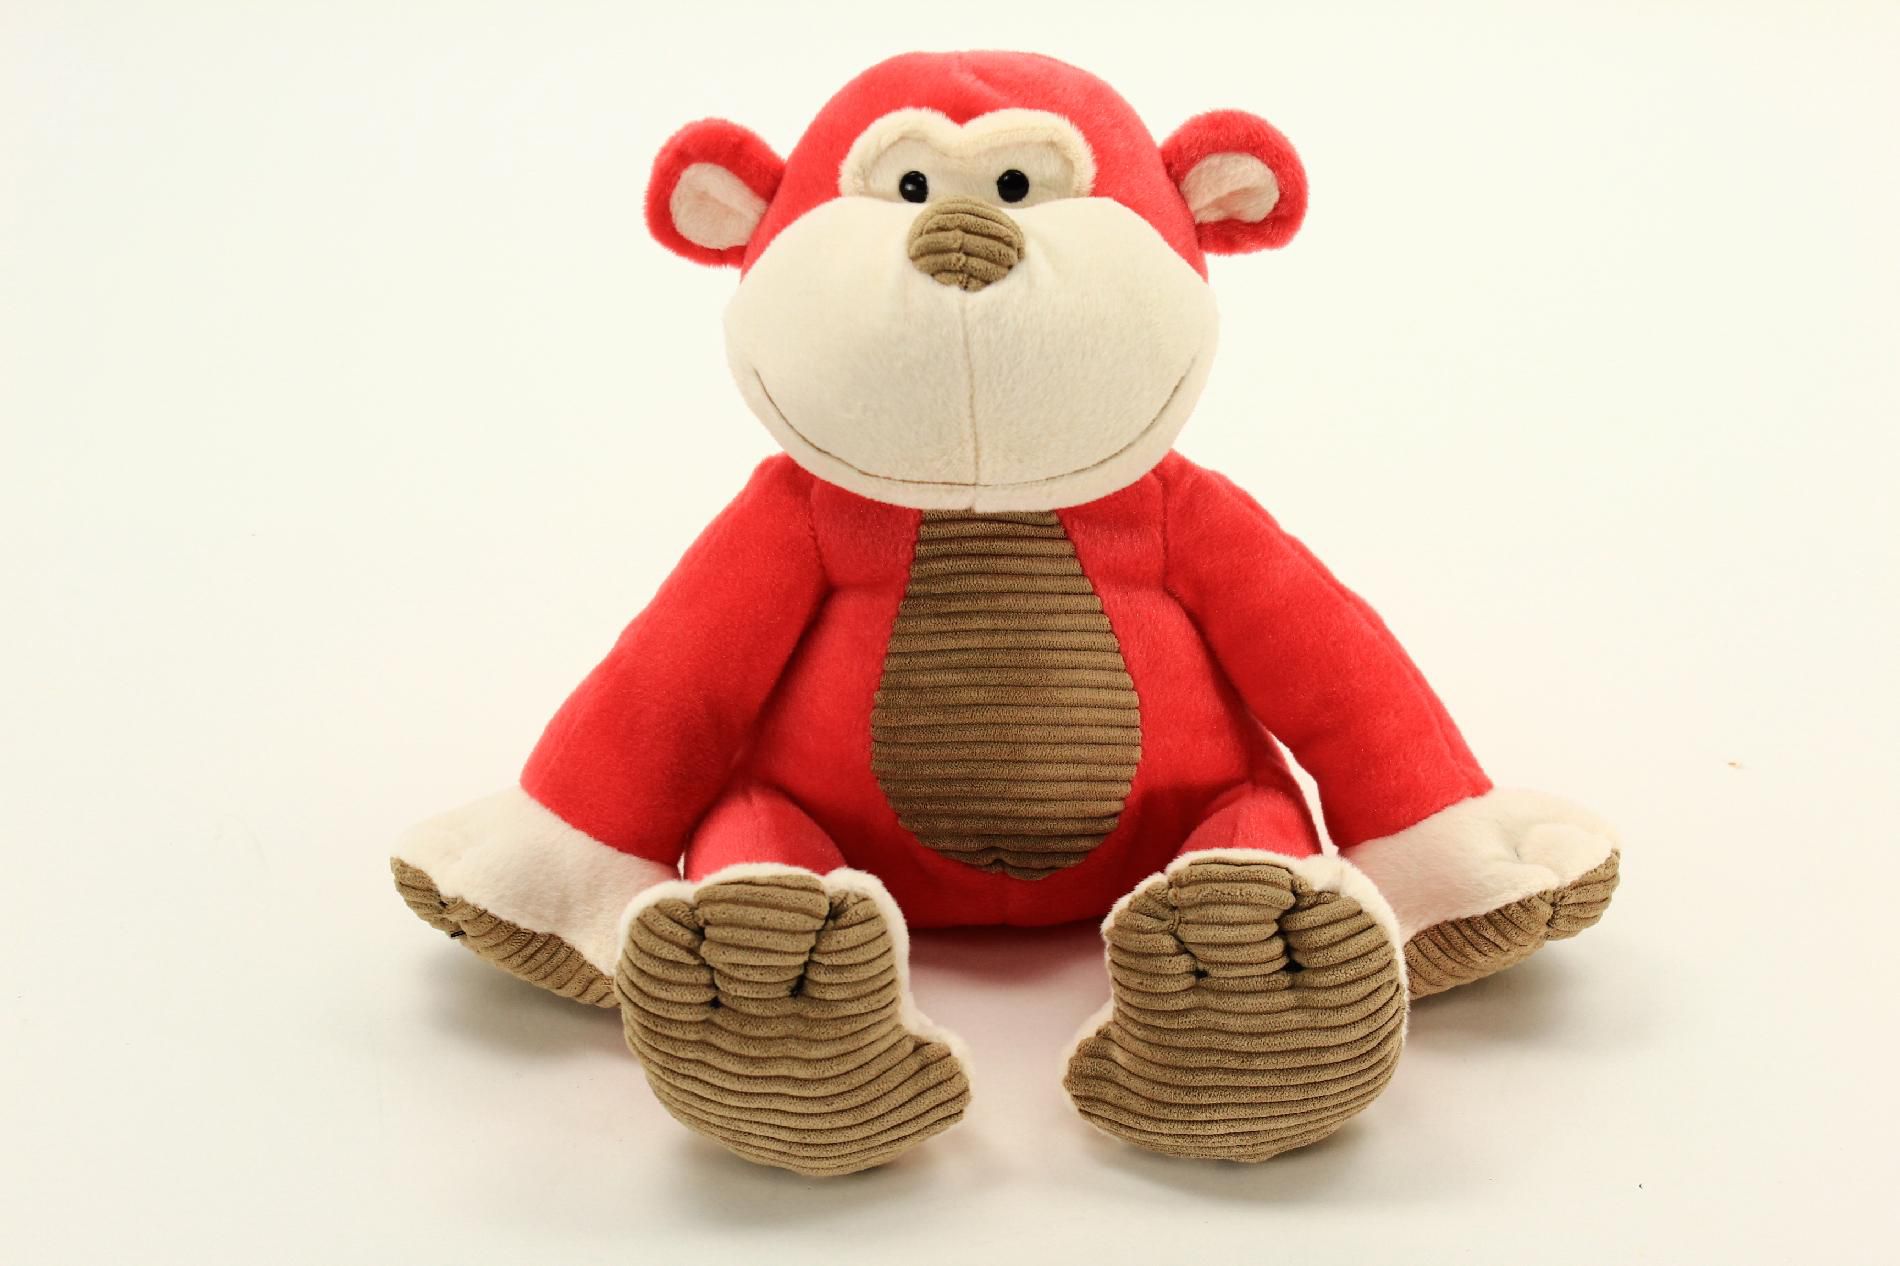 UPC 667902155629 - Animal Adventure Jungle Brights - Monkey - Brown with  Red Jacket 